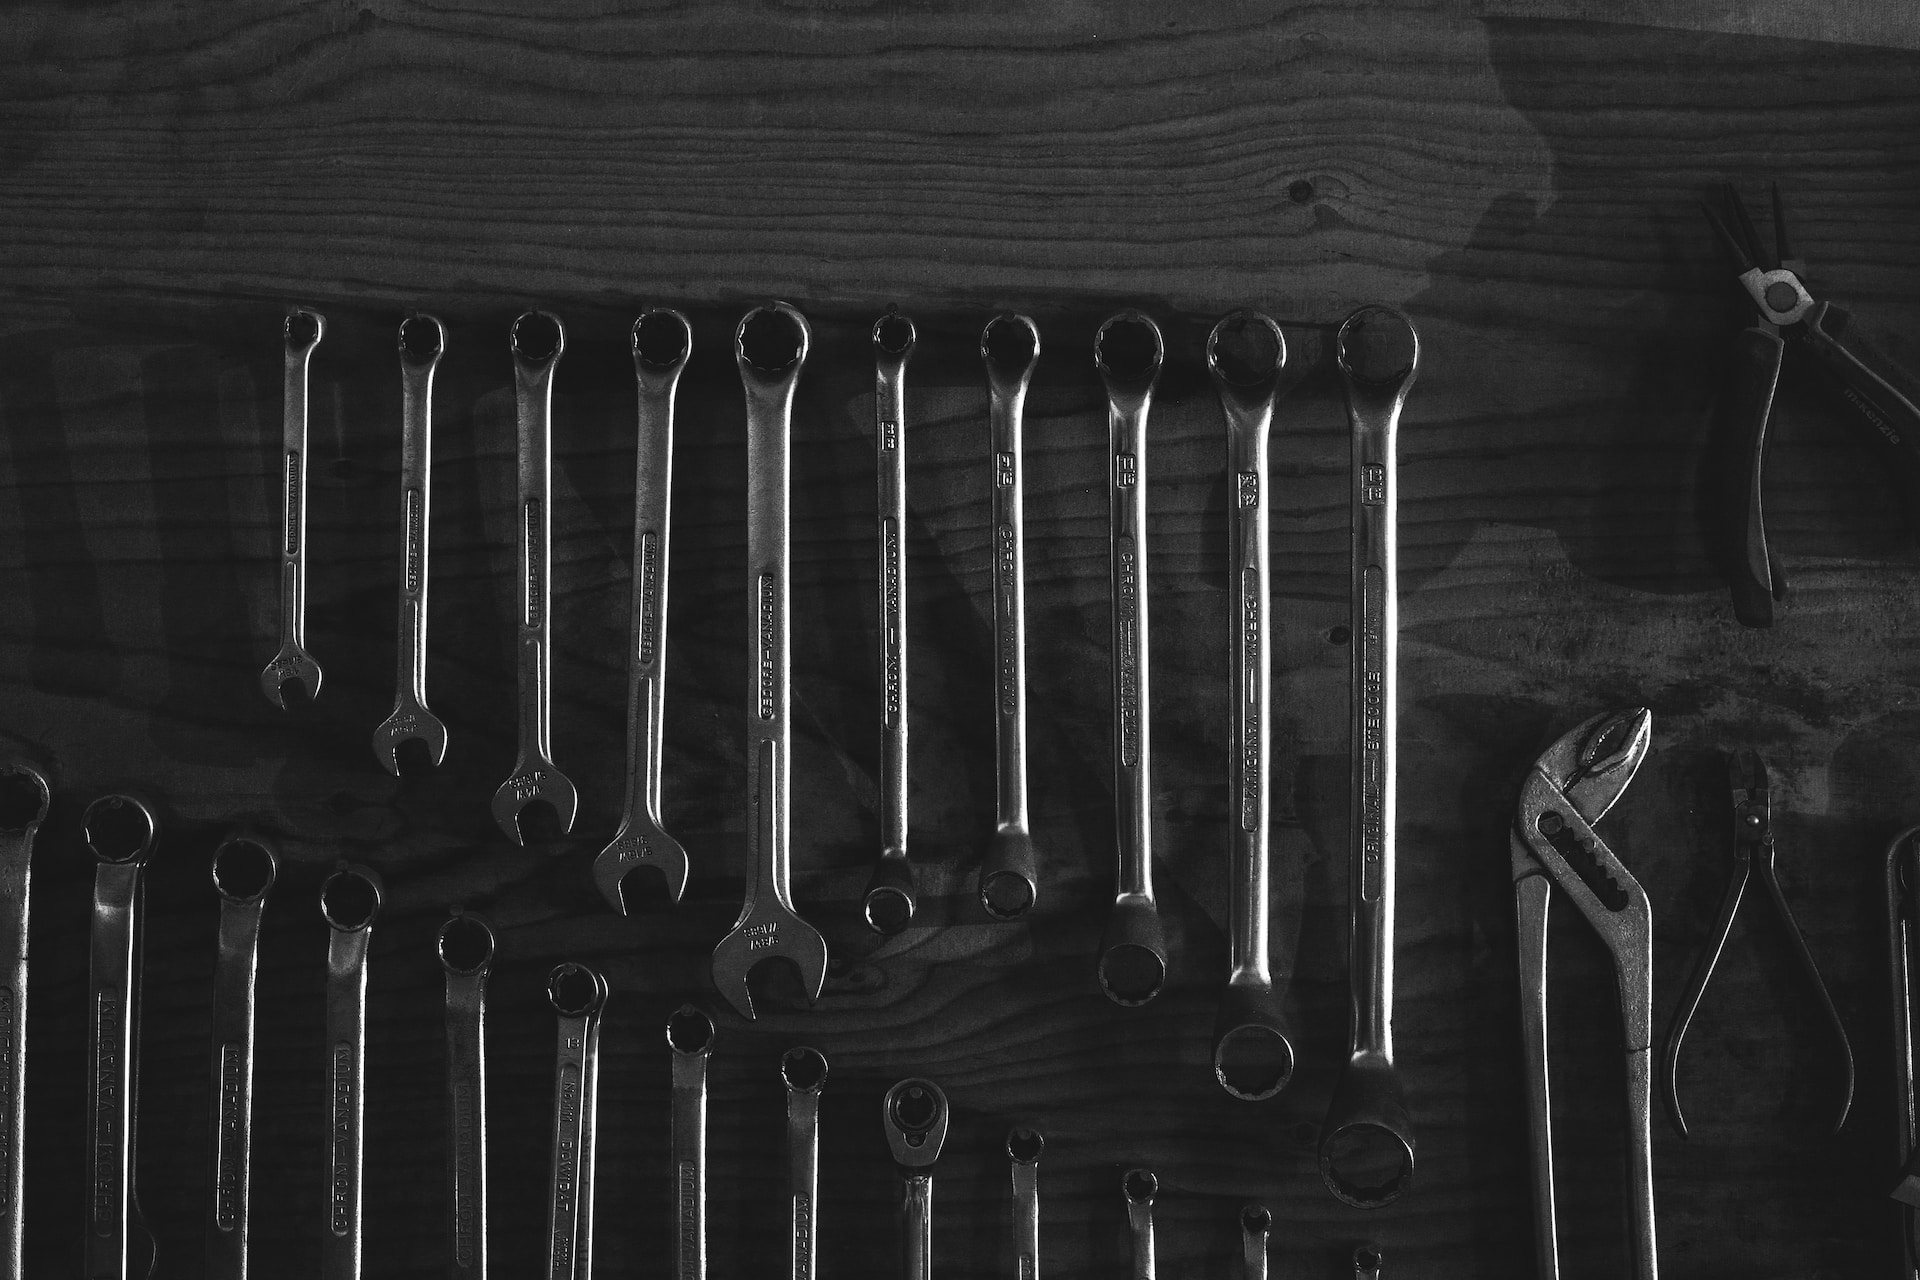 A set of wrenches